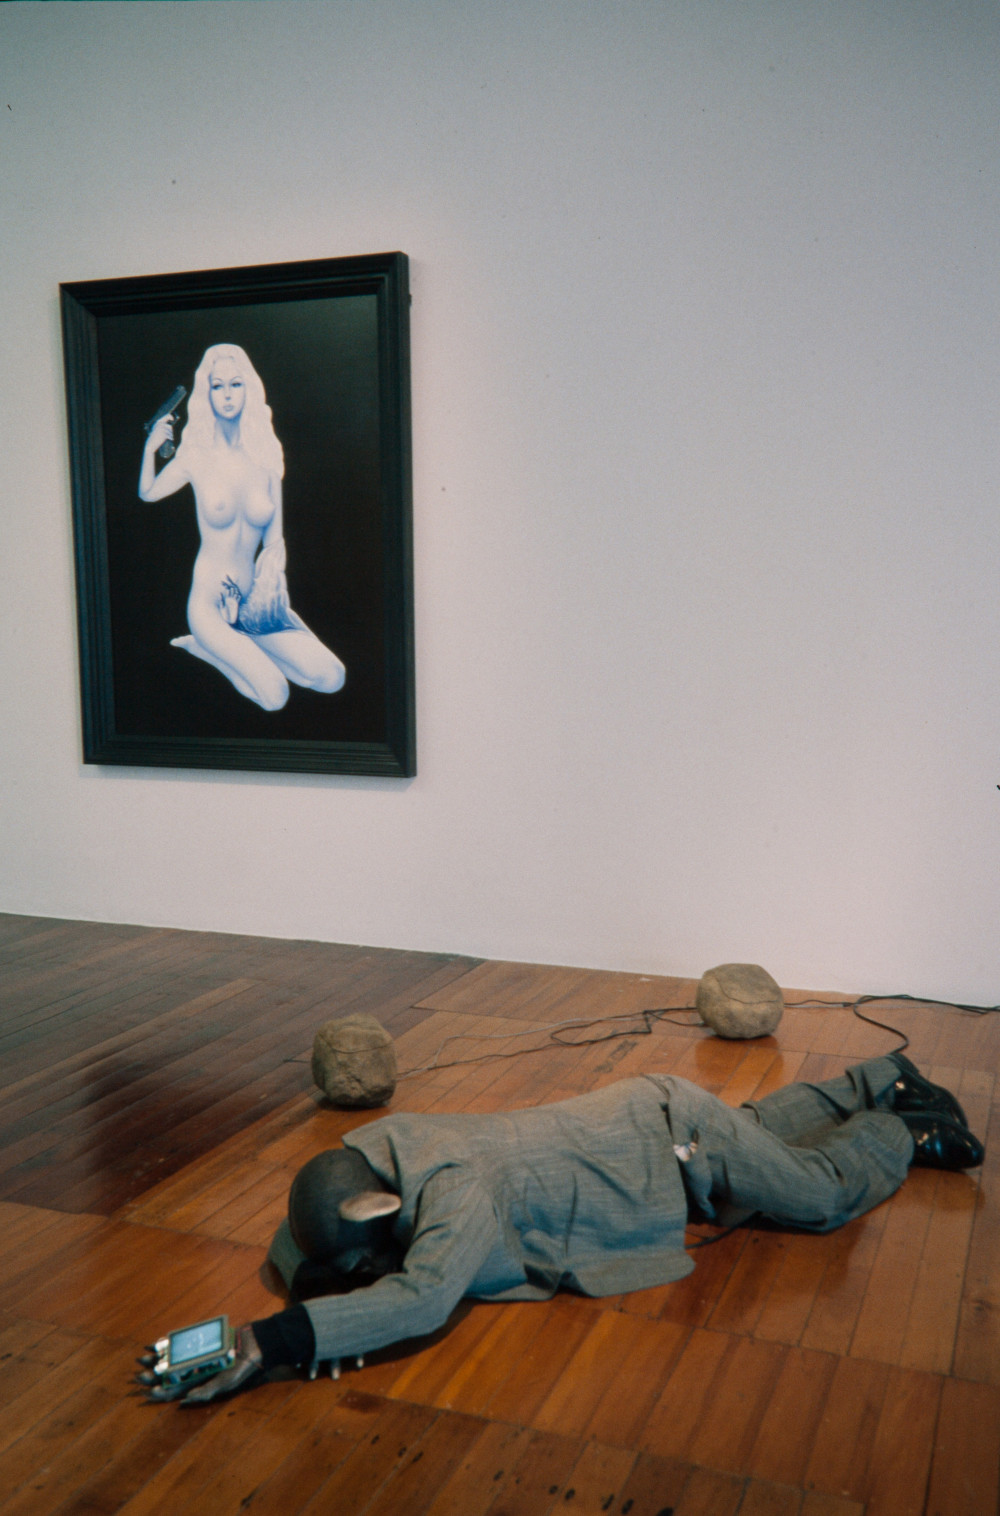 On the back white gallery wall hangs a realistic painting of a unnaturally pale, blue-tinged nude woman sitting down in a black void space. She stares at the viewer while holding a gun to her head. In the foreground, a lifelike replica of a chimp is sprawled across a polished wooden floor, dressed in a dark grey business suit. He is positioned face down and holds a device with a screen on it in one outstretched hand. 